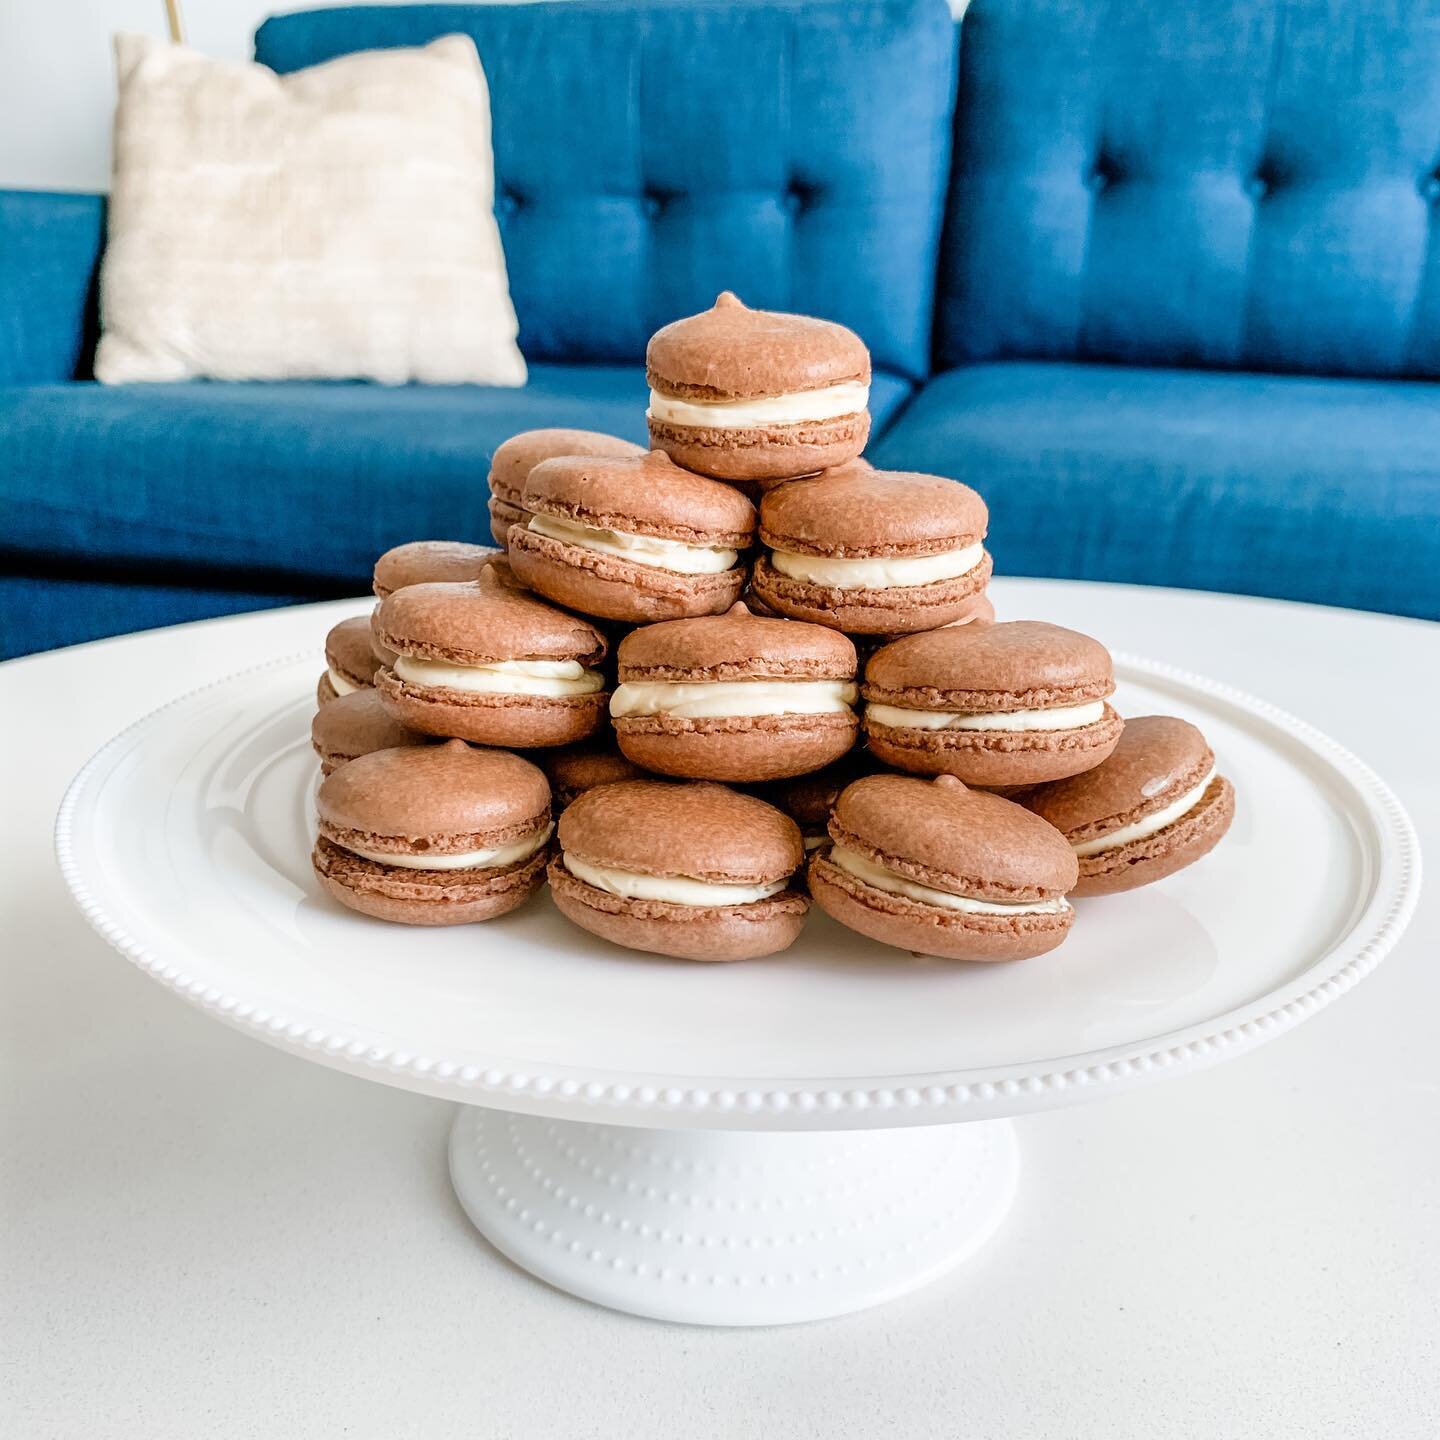 Chocolate macarons filled with classic vanilla French buttercream ✨✨✨
-
Recipe on my blog, linked in bio!
-
This one took me a second weekend to get right, but totally worth it. I learned lessons in both patisserie and patience!
-
I skipped posting m